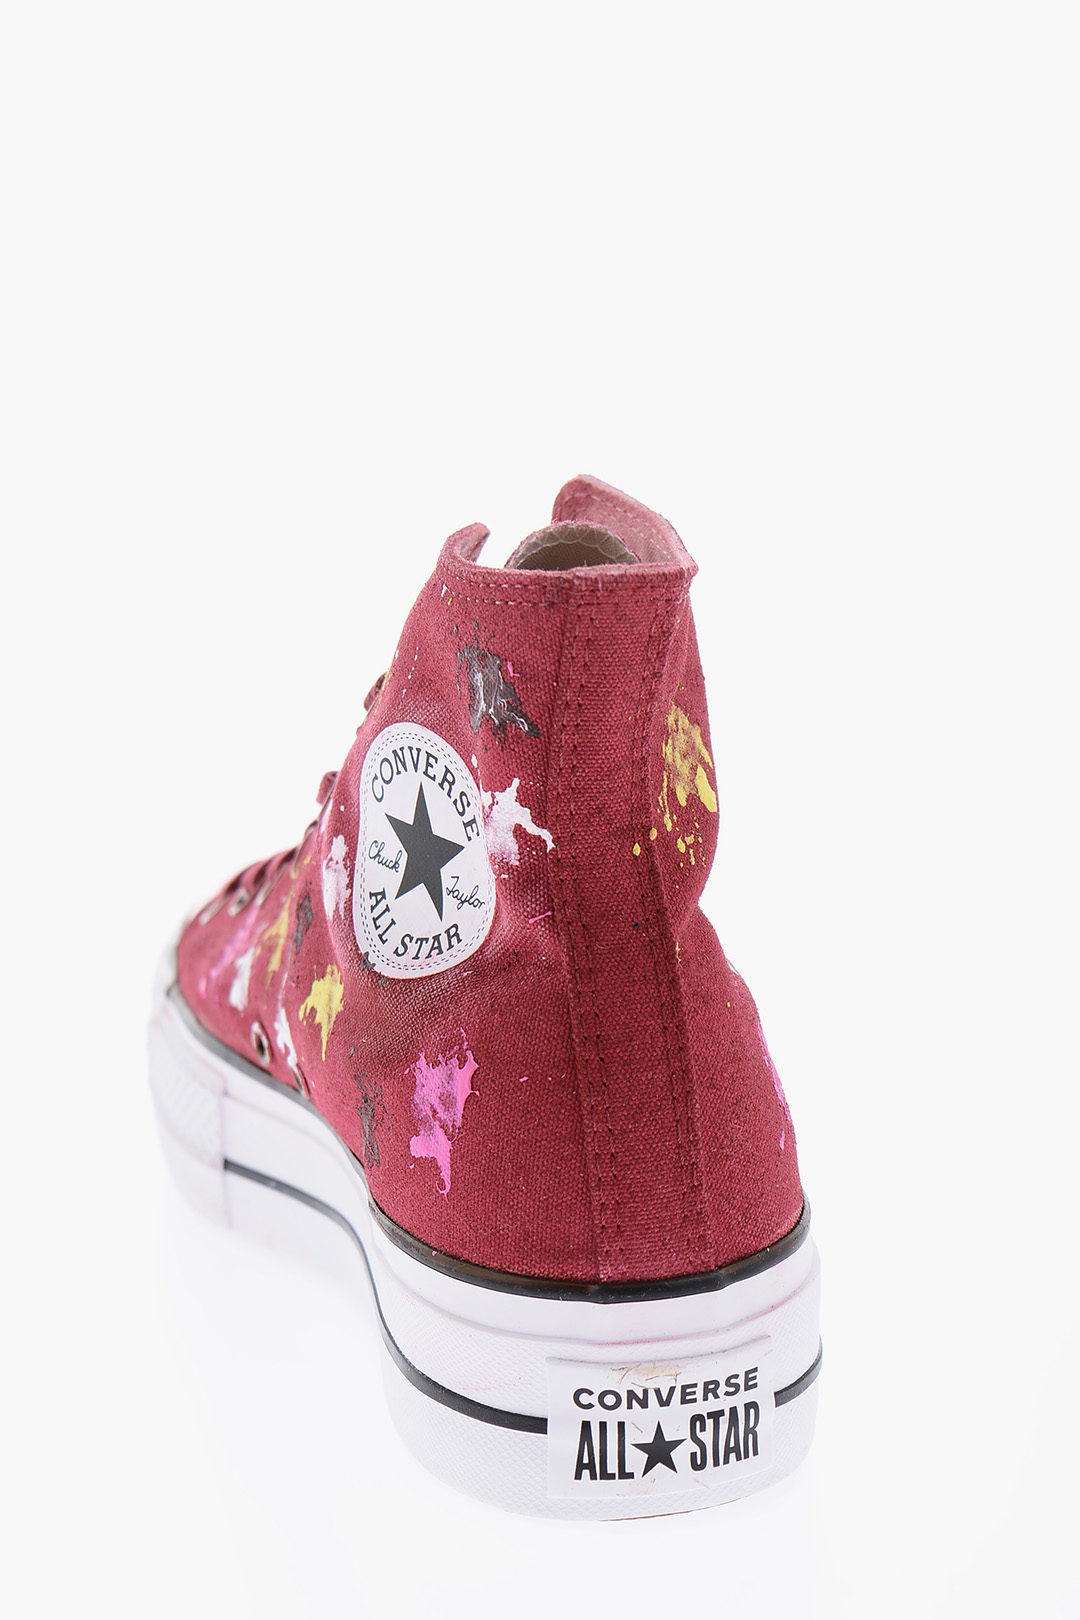 https://data.glamood.com/imgprodotto/all-star-chuck-taylor-4-cm-painting-effect-high-top-sneakers_1235268_zoom.jpg